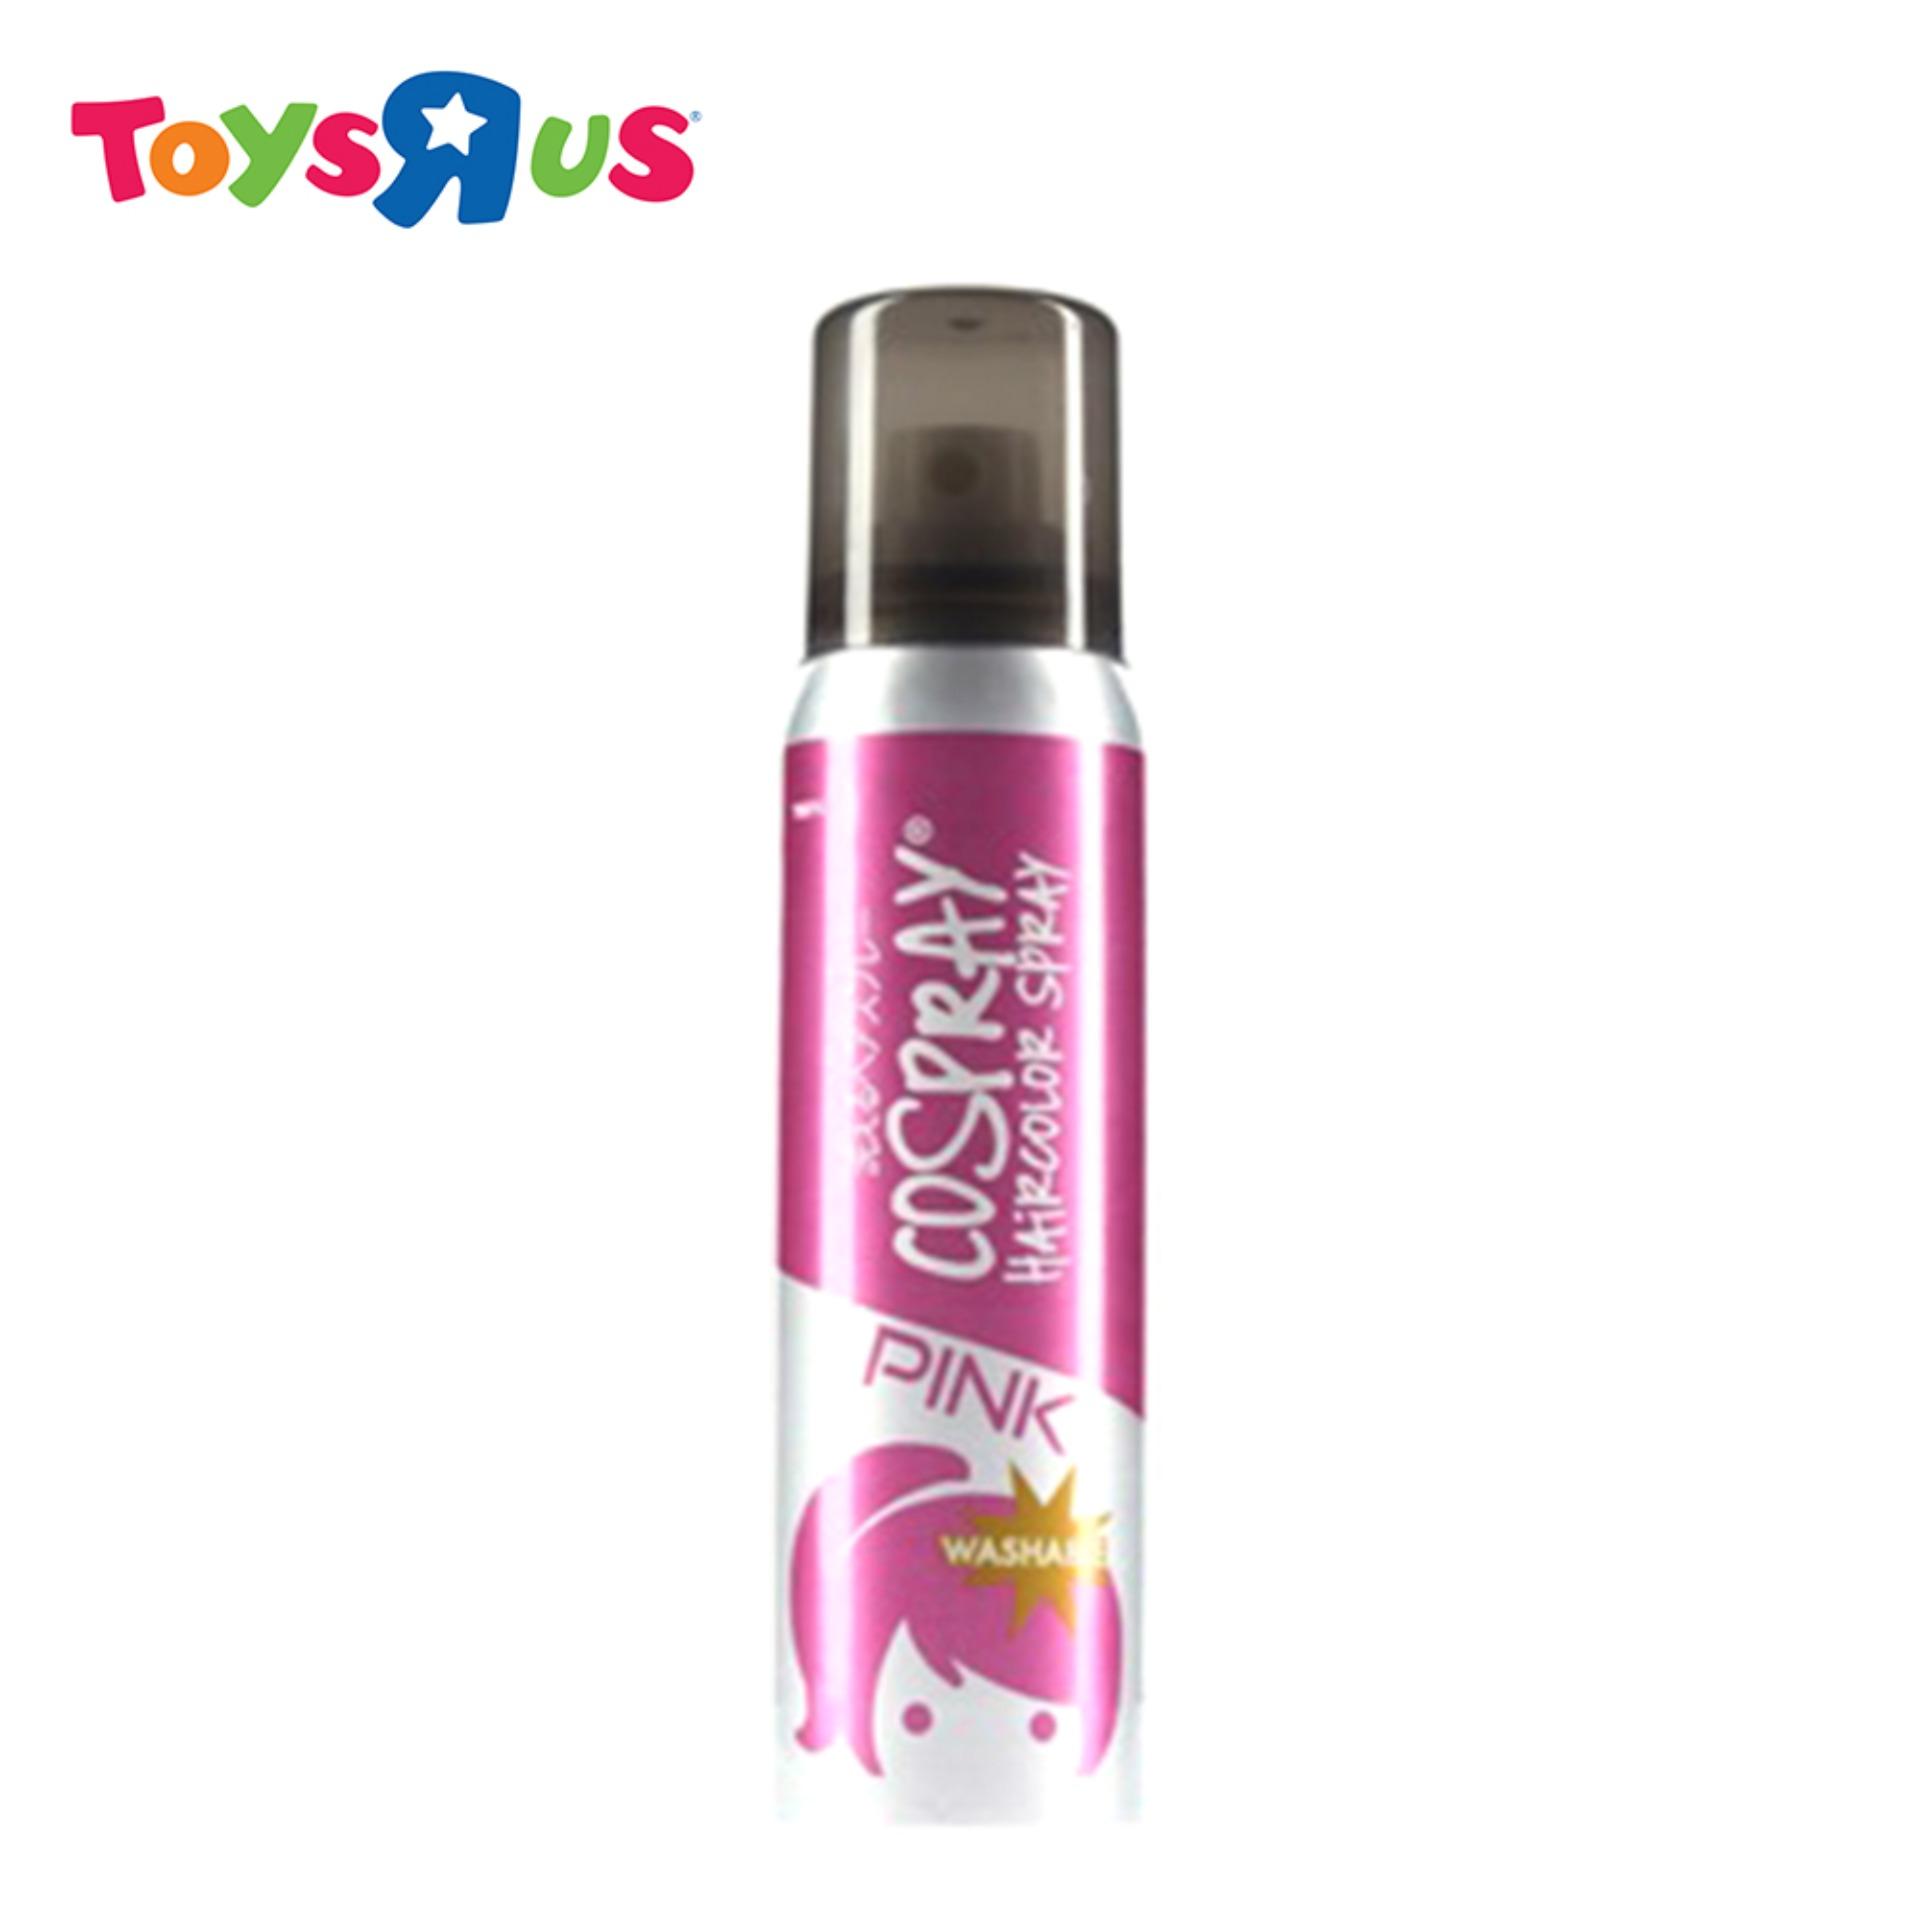 Cospray Washable Hair Color Spray (Pink) Toys R Us